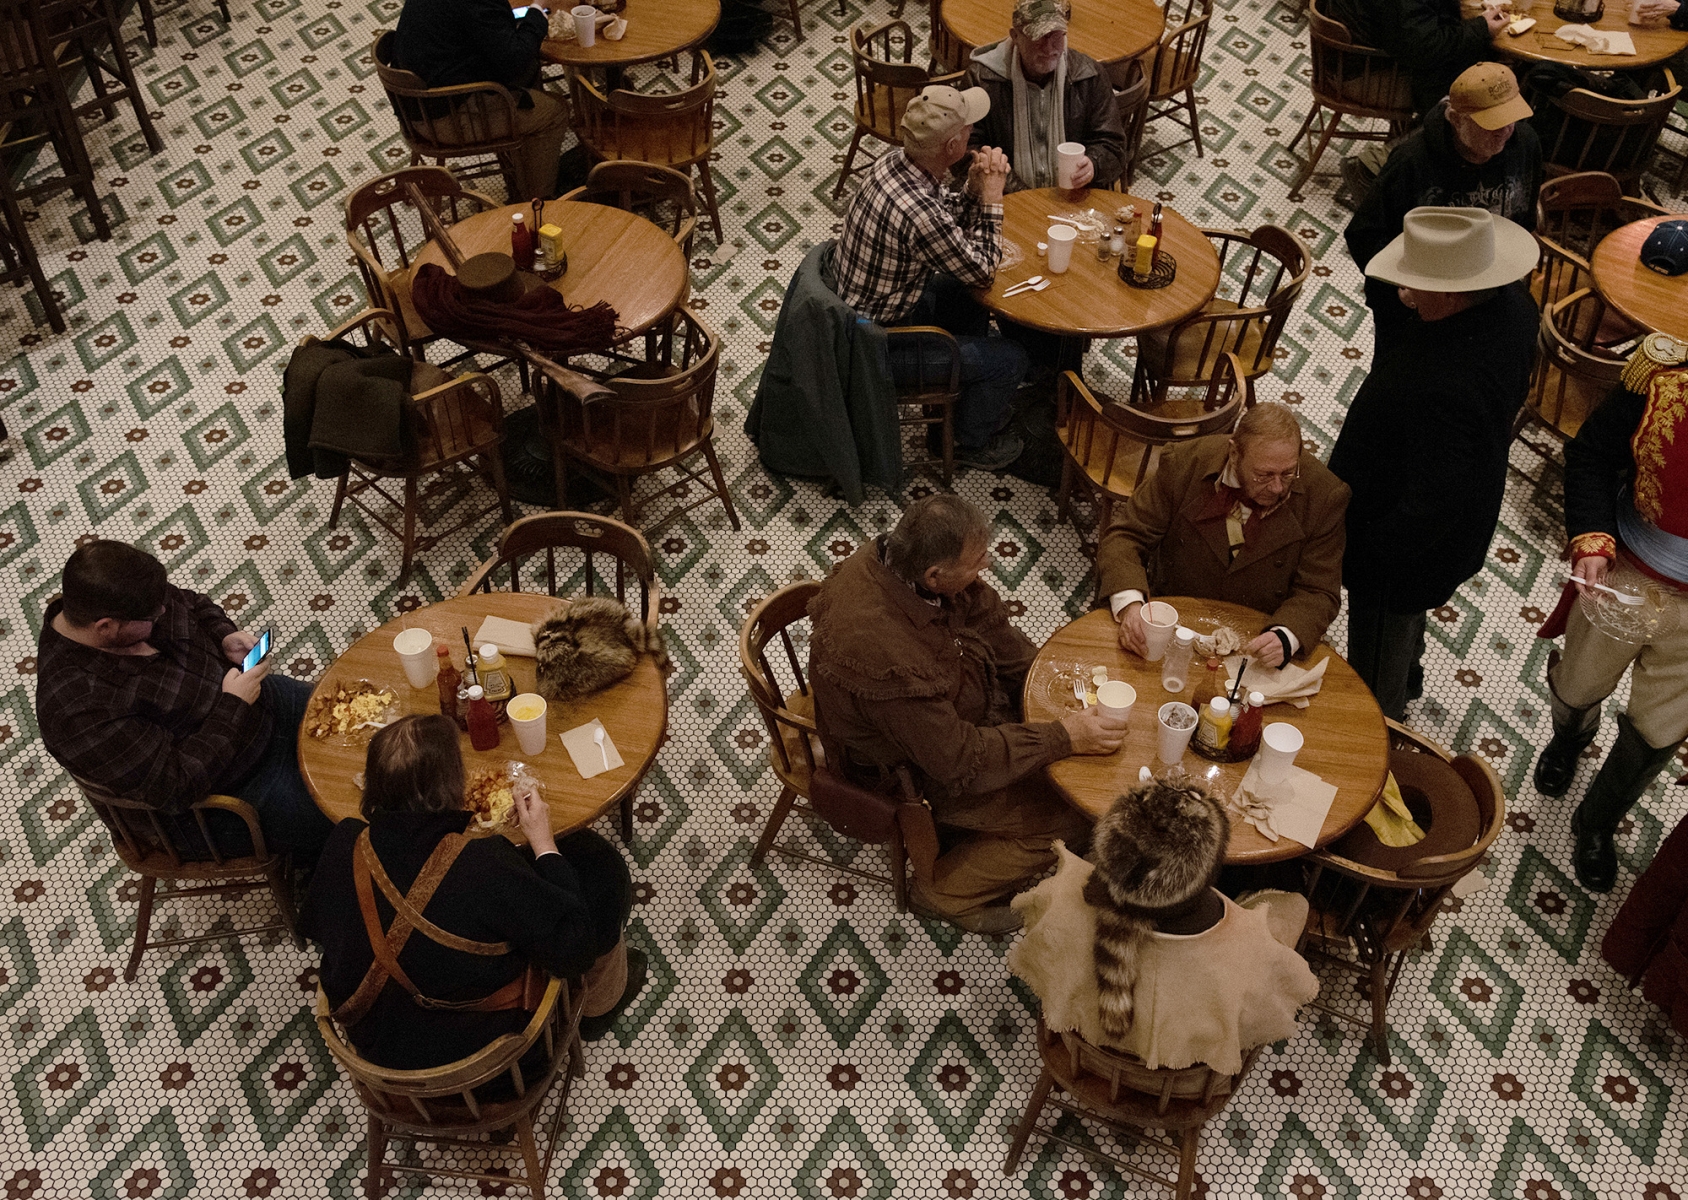 Some individuals who participated in the Dawn at the Alamo ceremony eat breakfast after the event March 6, 2019, at the Buckhorn Saloon.